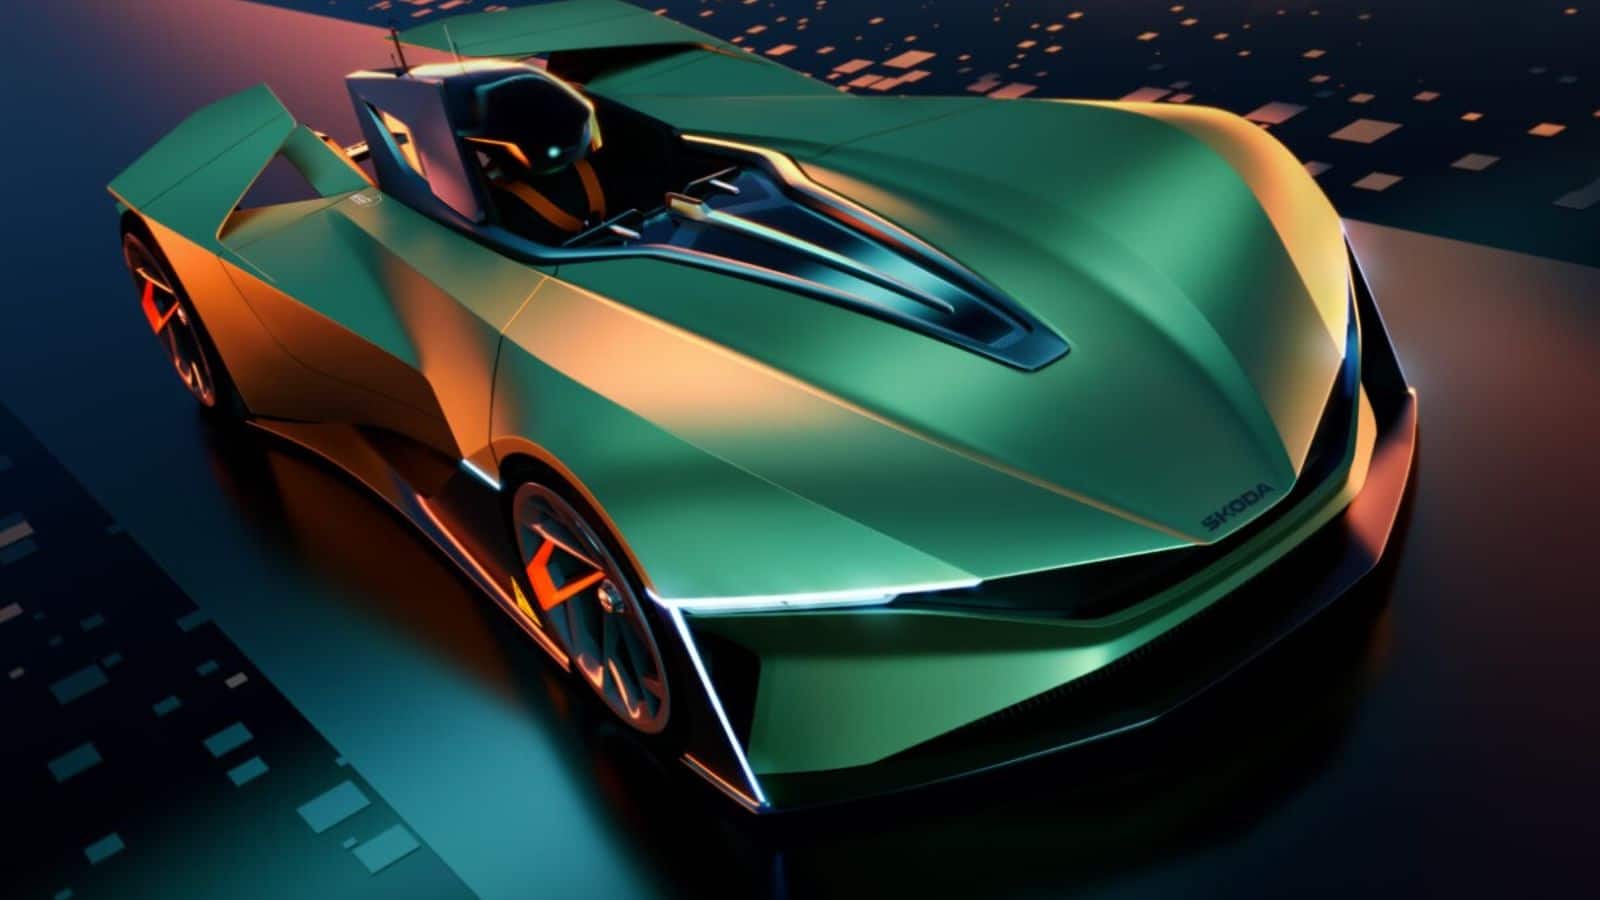 Everything we know about SKODA Vision Gran Turismo electric supercar